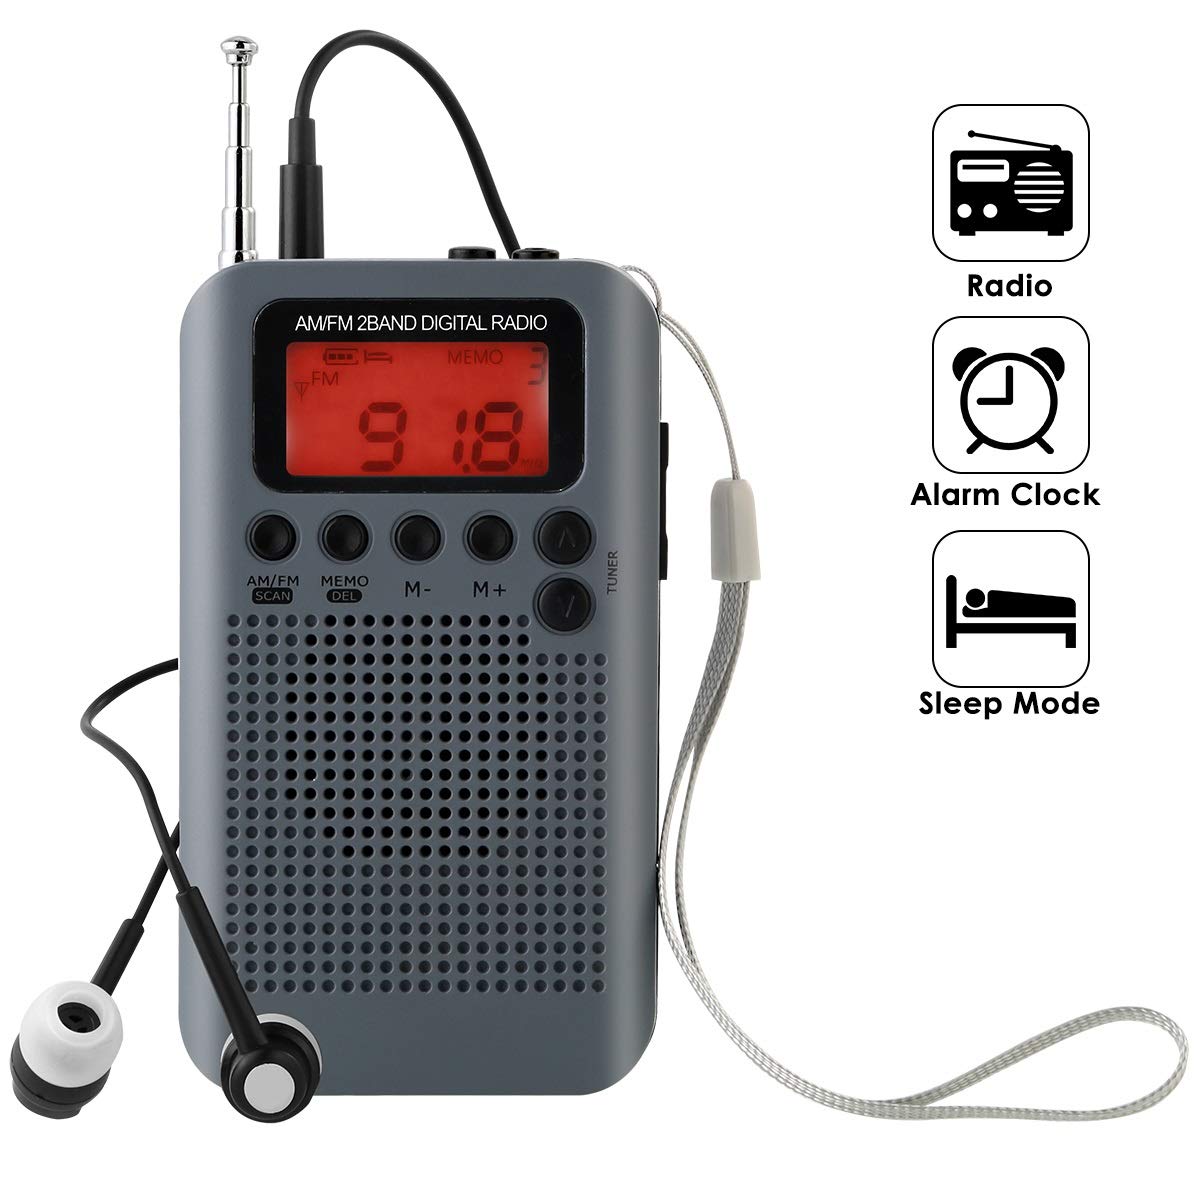 Portable AM FM Two Band Radio with Alarm Clock & Sleep Timer Digital Tuning Stereo Radio with 3.5mm Headphone Jack for Walking Jogging Camping